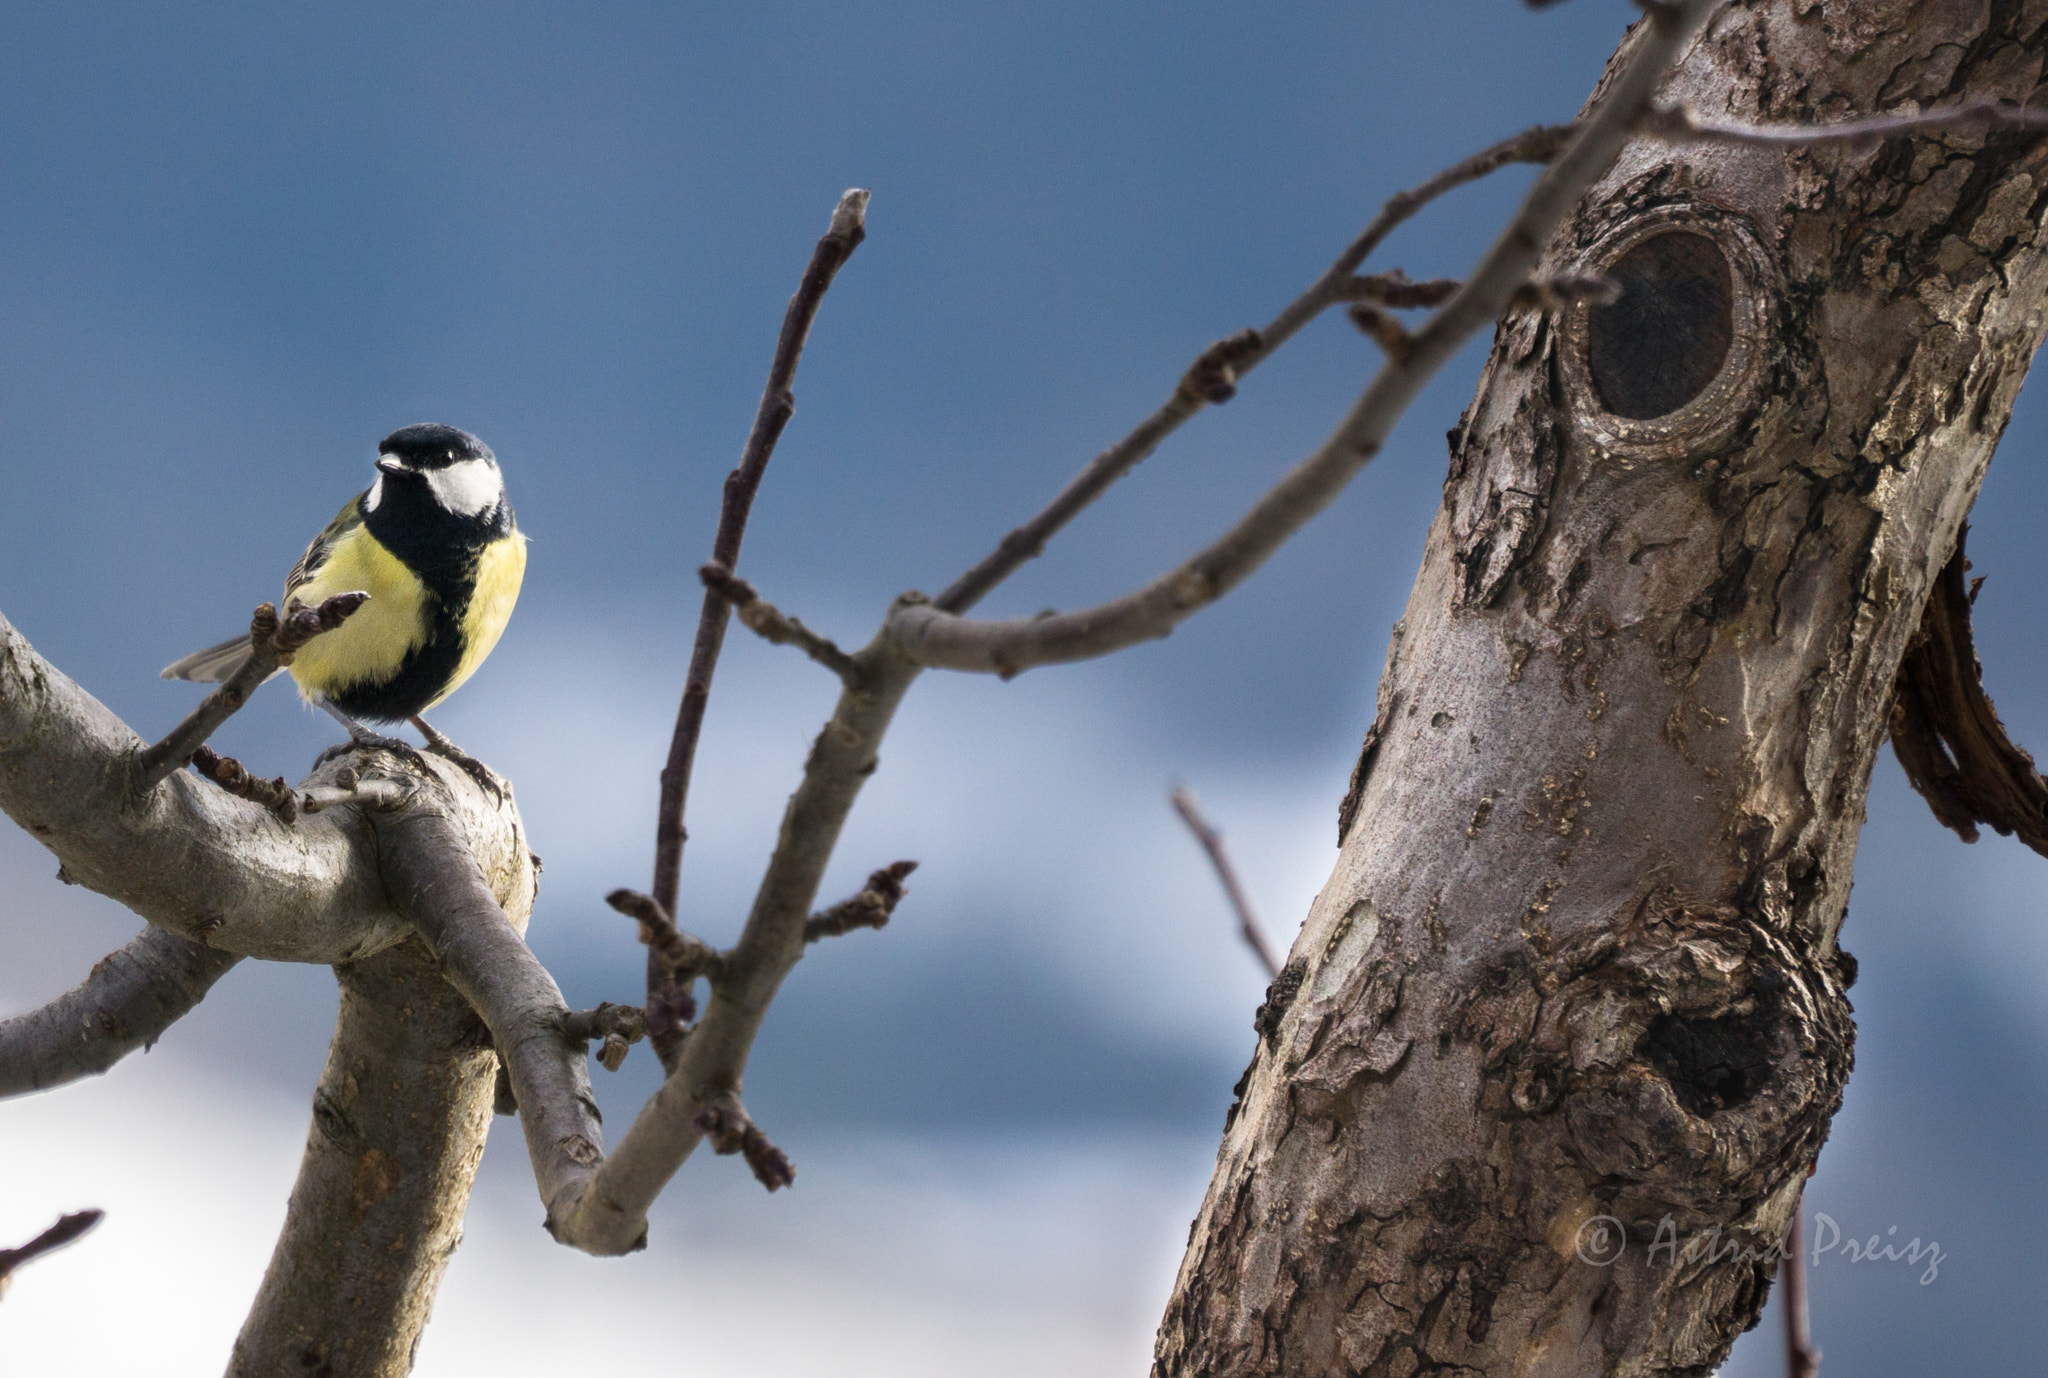 Sony a6000 sample photo. Great tit in a tree photography